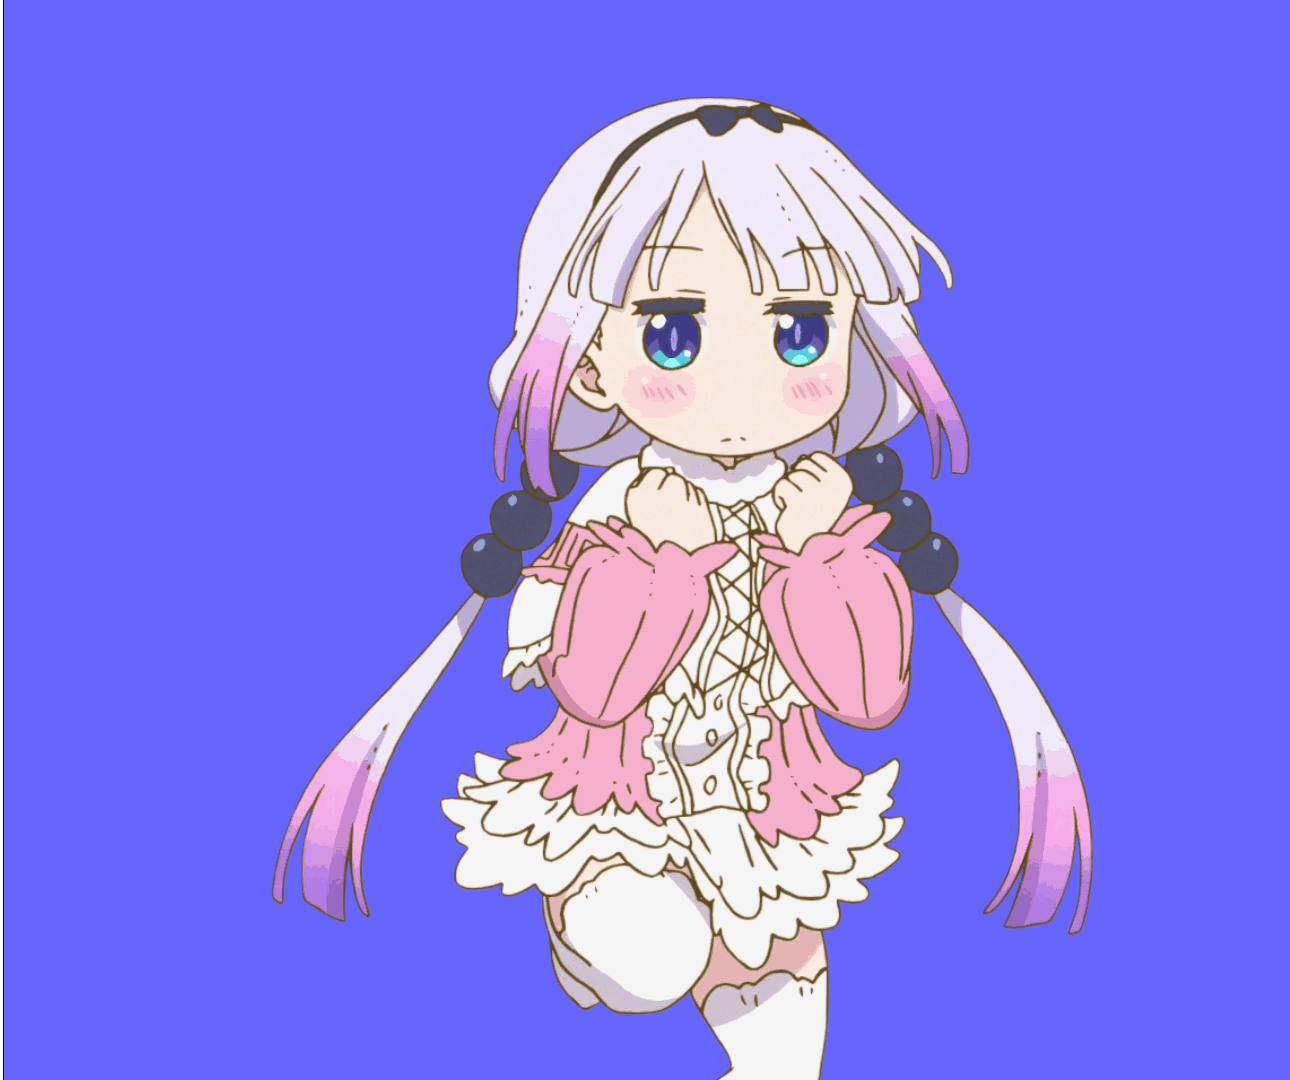 View, Download, Rate, and Comment on this Kanna Kamui Gif.